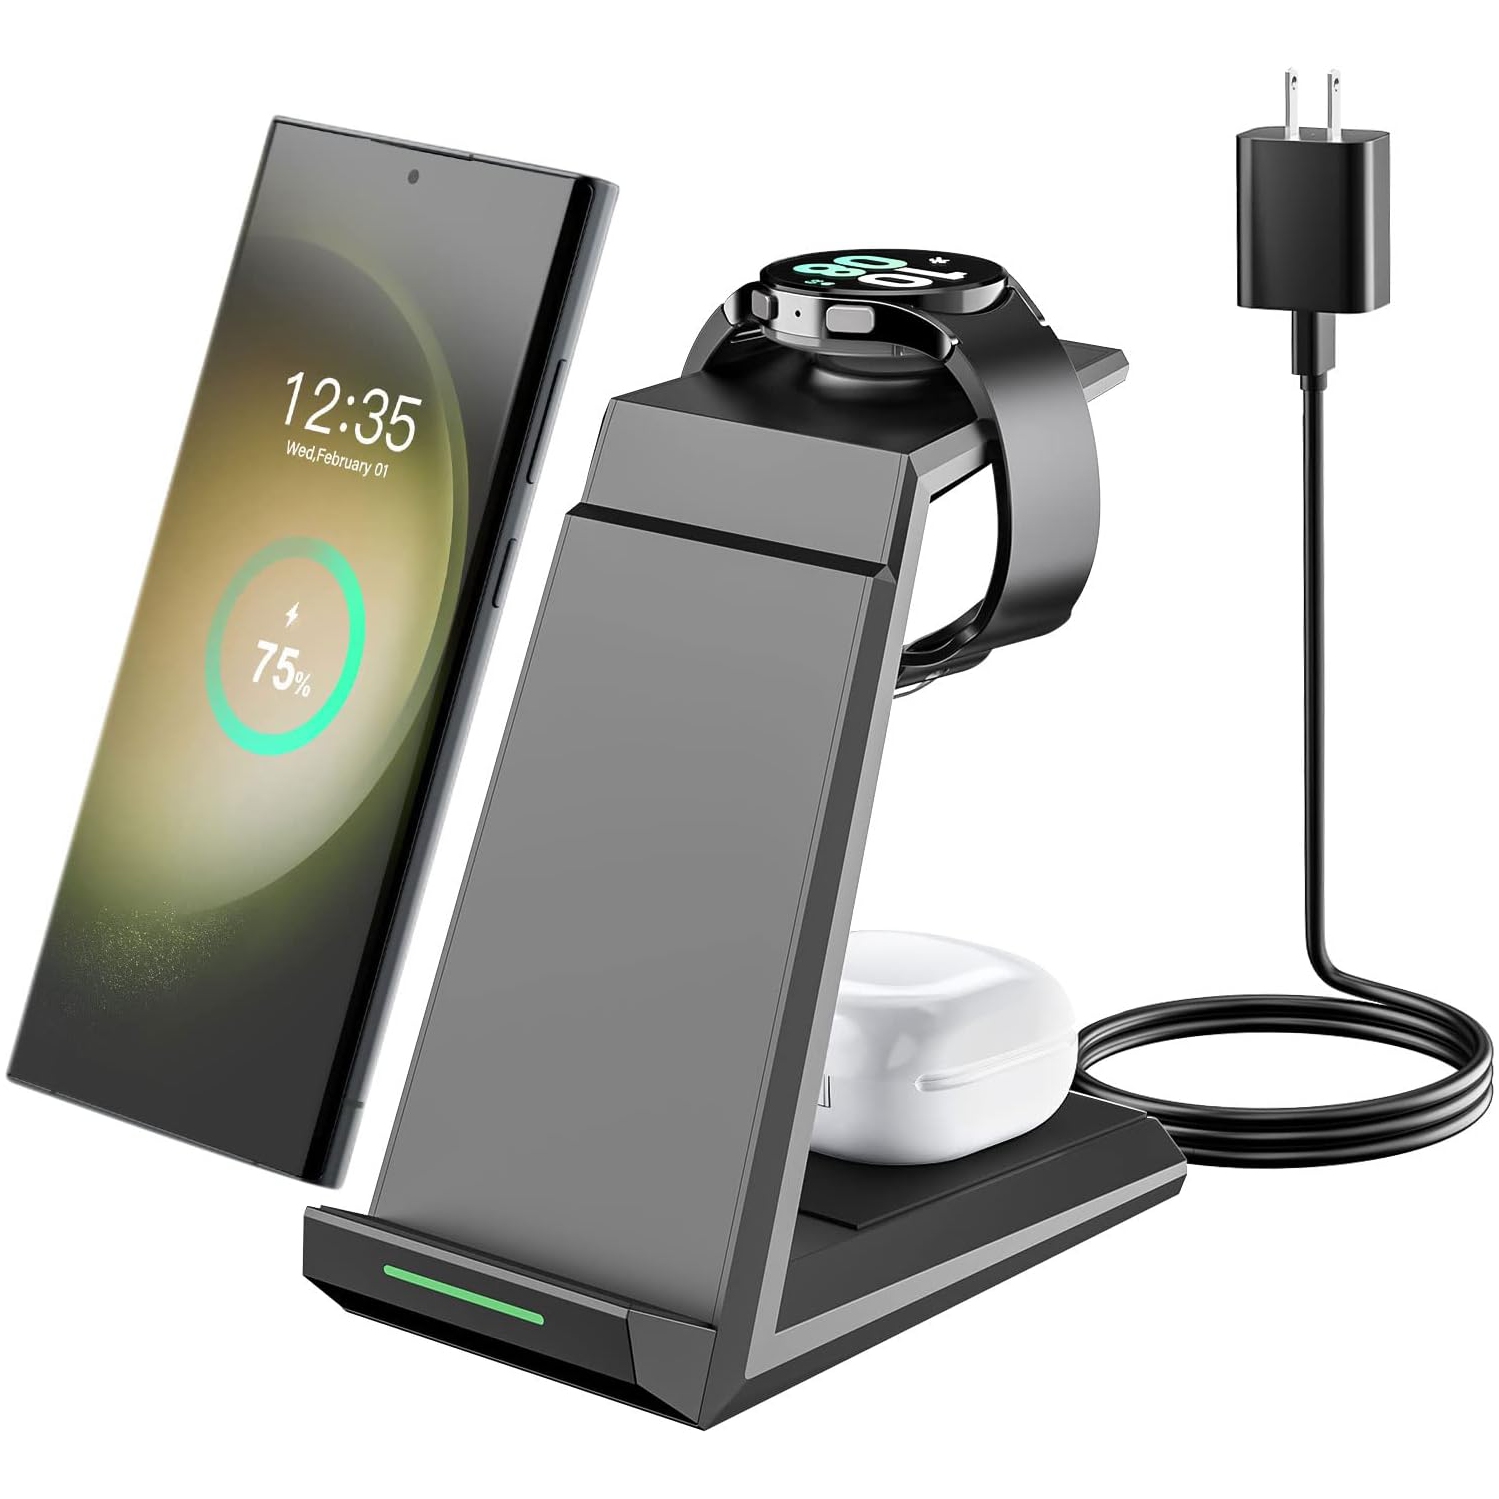 Wireless Charger for Samsung - 3 in 1 Charging Station for Multiple Devices, Fast Charger Stand Dock for Galaxy